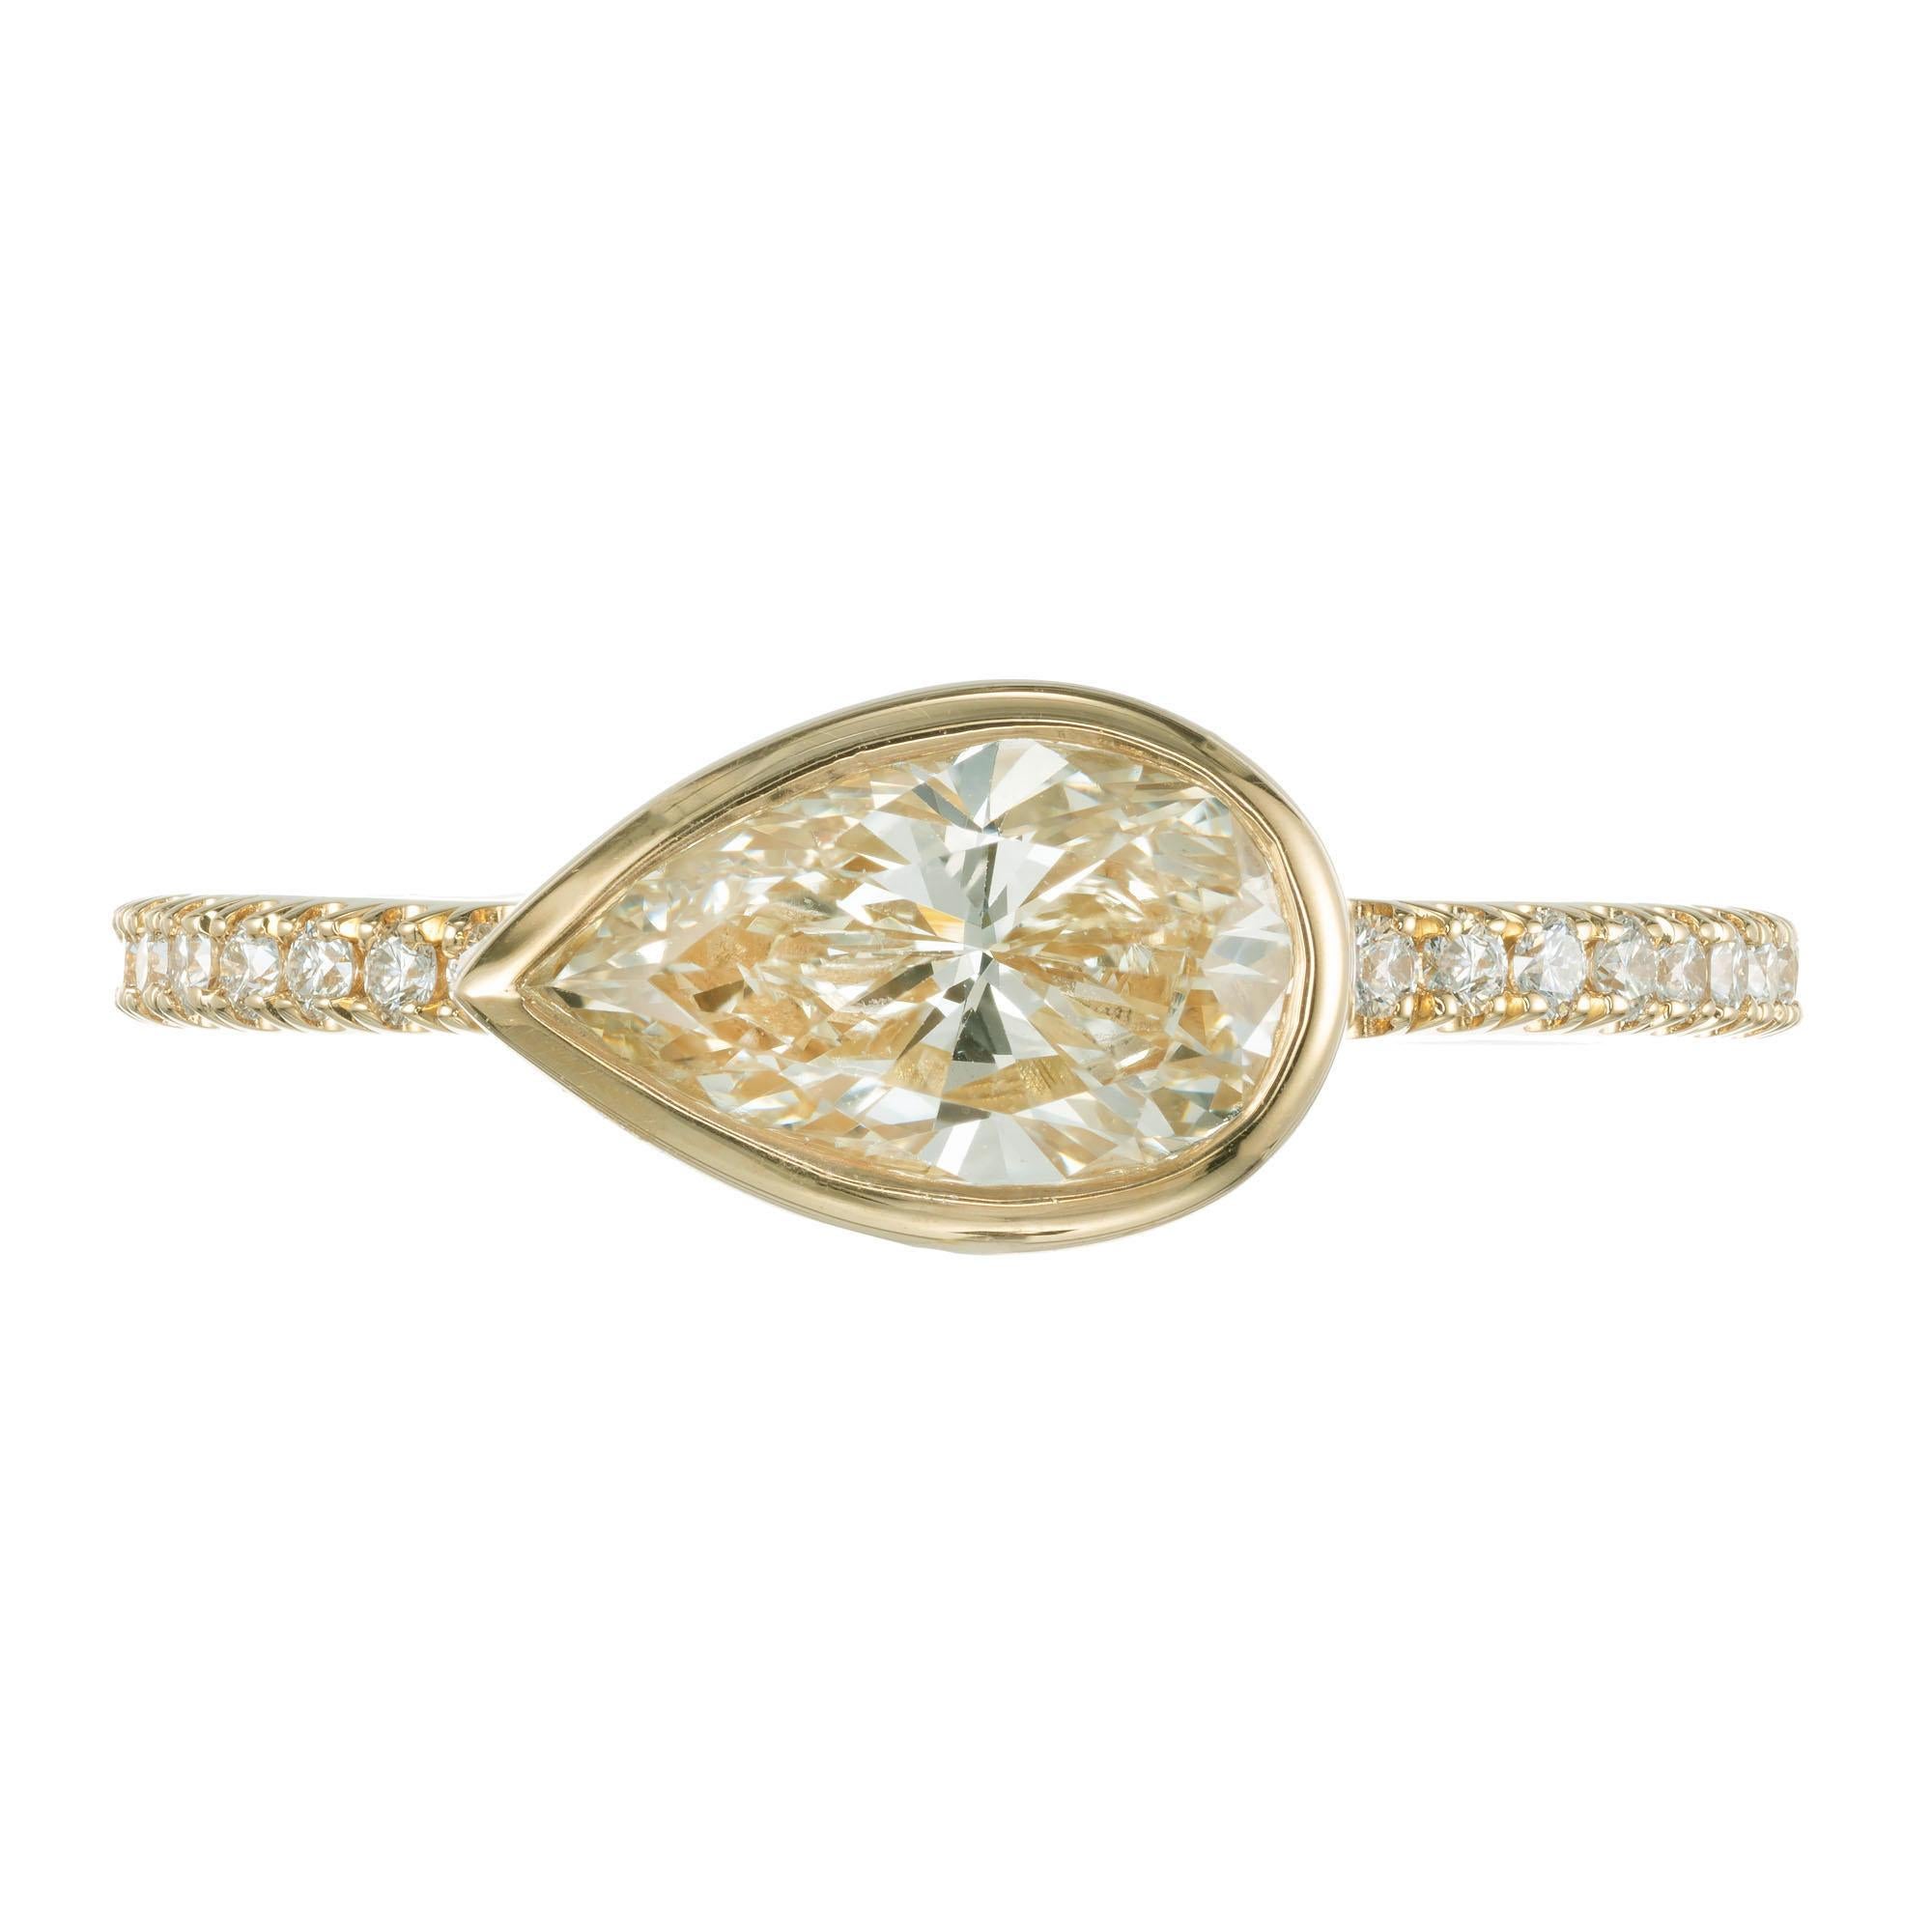 Peter Suchy pear shaped diamond engagement ring. GIA certified light soft yellow center stone in a 18k yellow gold setting with 20 round micro pave accent diamonds. Created in the Peter Suchy Workshop. 

1 pear-shaped light-yellow diamond N SI,